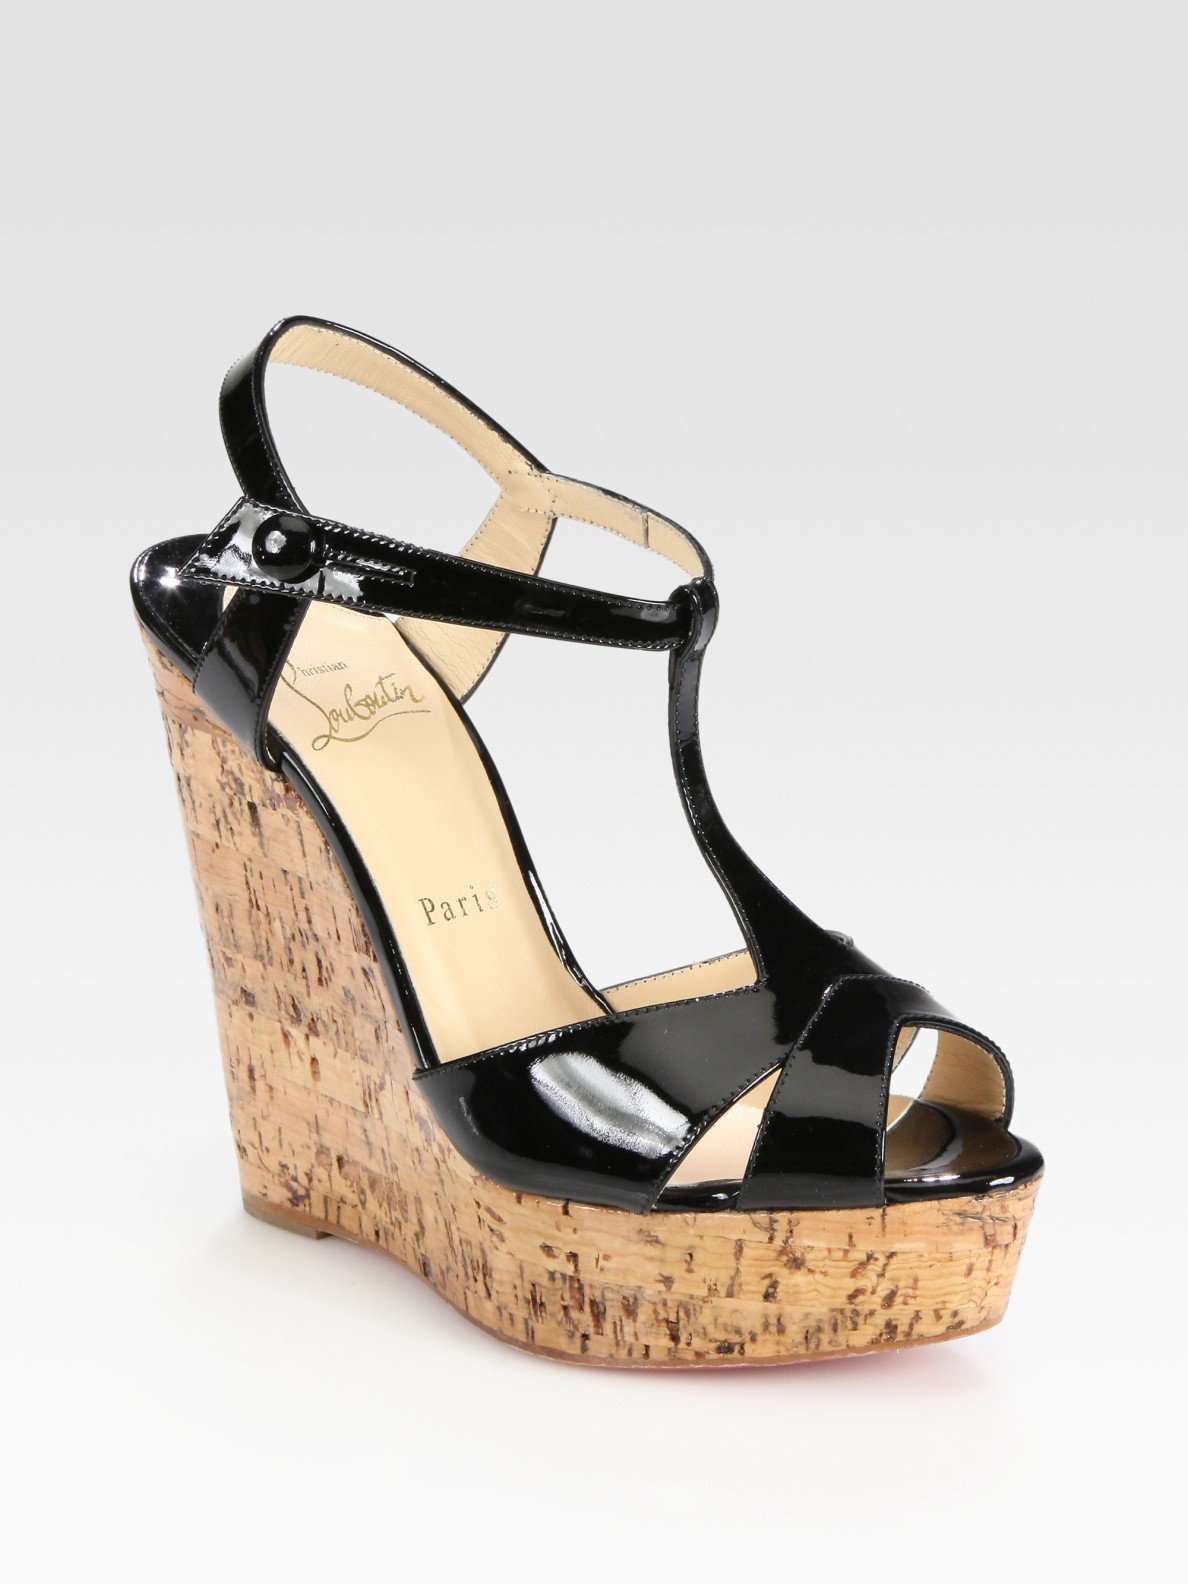 Christian louboutin Patent Leather T-strap Cork Wedge Sandals in ...